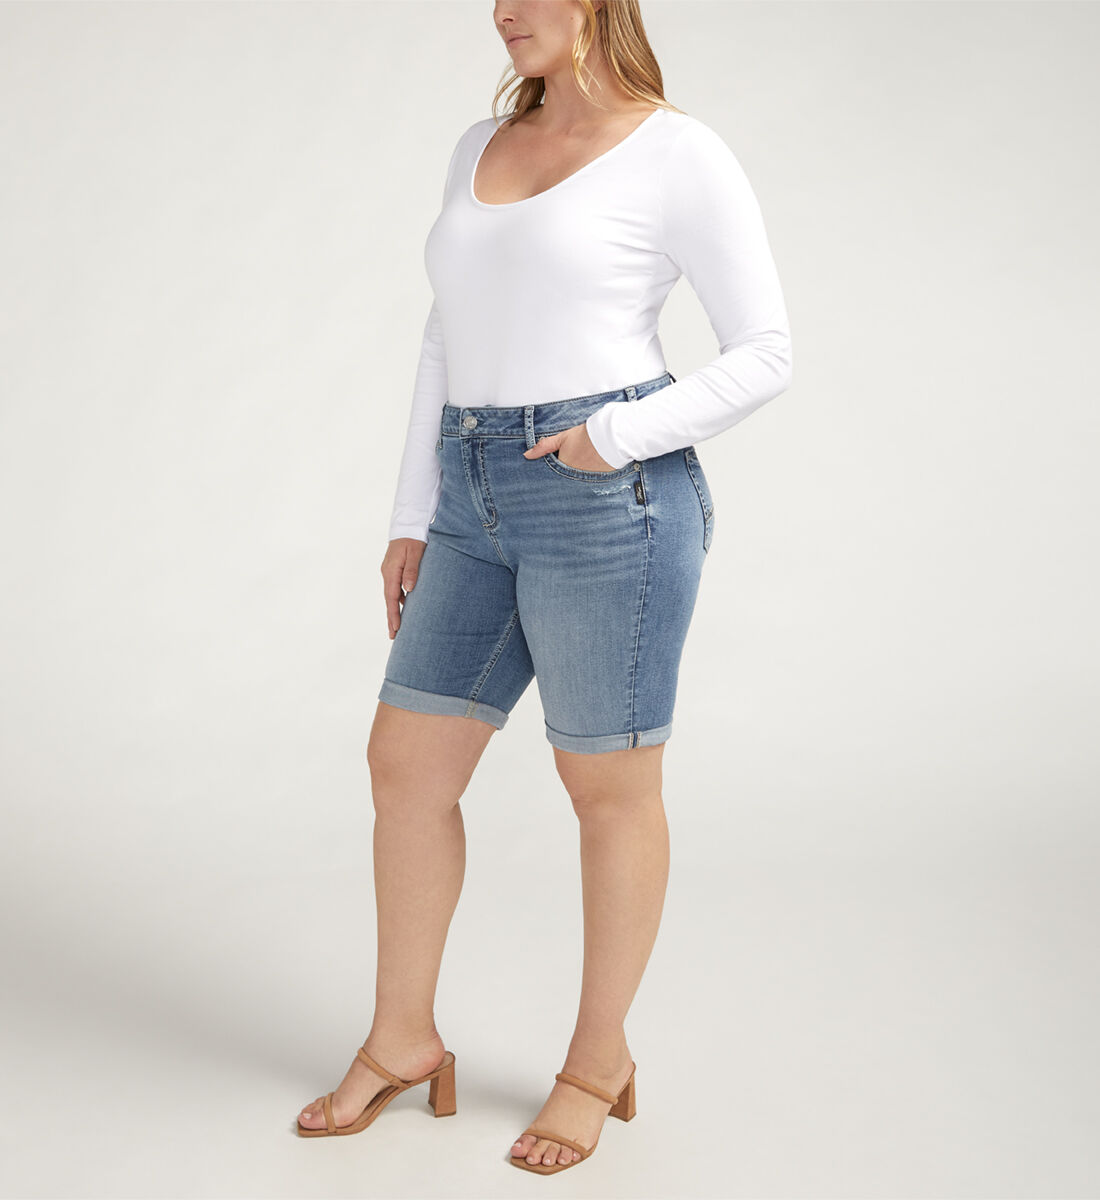 Buy Elyse Mid Rise Bermuda Shorts Plus Size for USD 58.00 | Silver 